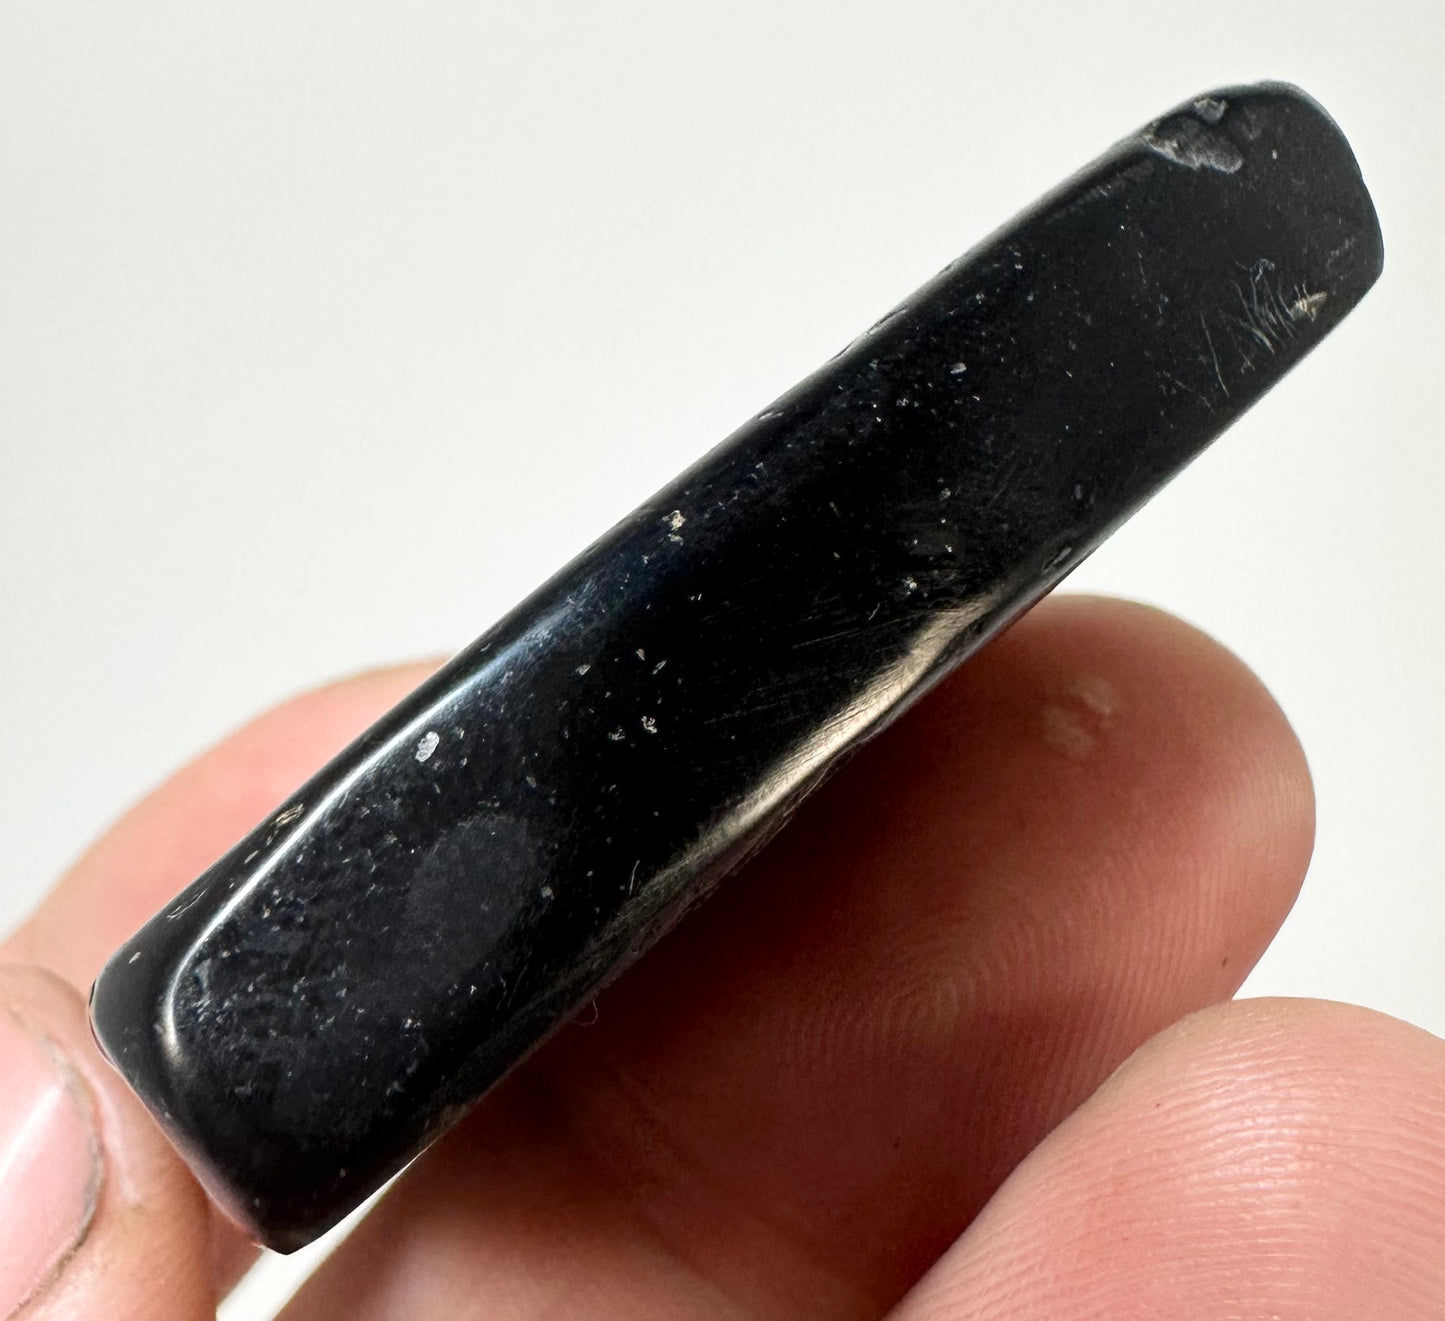 Whitby Jet 12 grams Lower Jurassic, Upper Lias from Whitby, North Yorkshire.